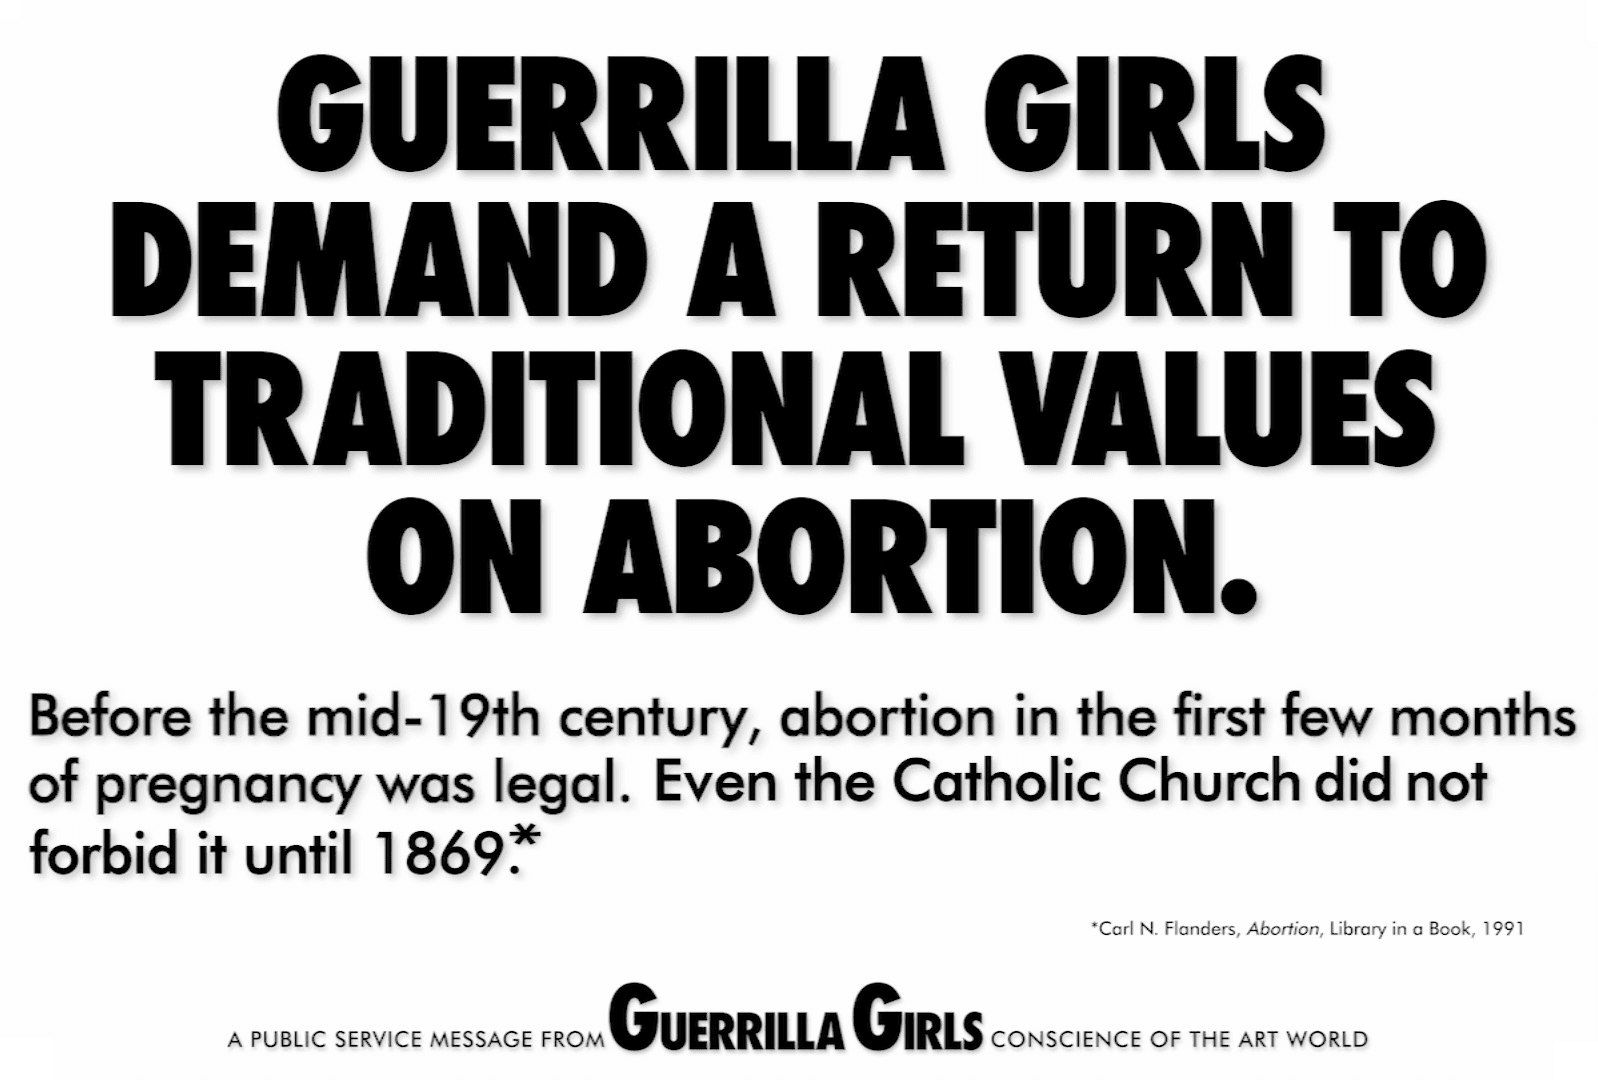 Guerrilla Girls Demand a Return to Traditional Values on Abortion 1/50